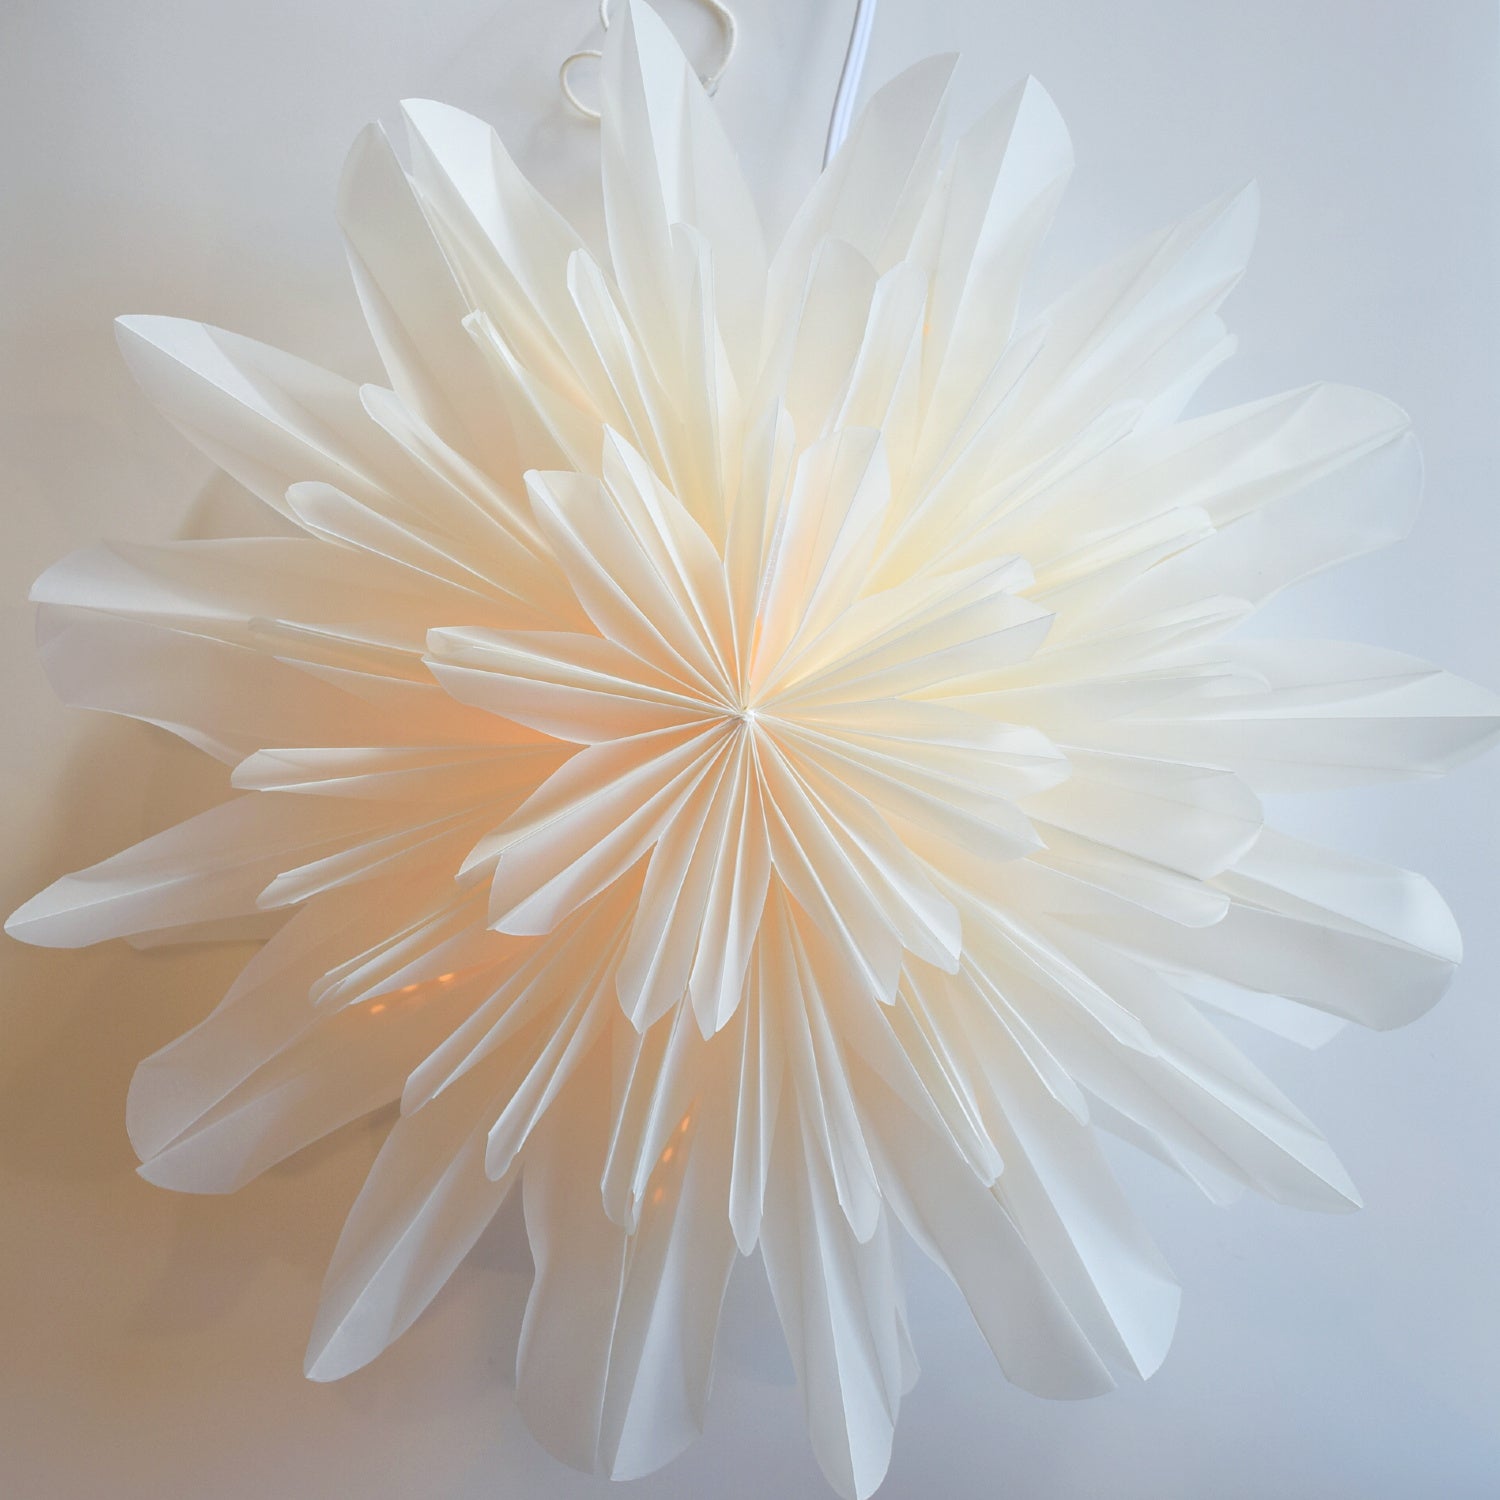 17" White Snowfall Snowflake Star Lantern Pizzelle Design - Great With or Without Lights - Ideal for Holiday and Snowflake Decorations, Weddings, Parties, and Home Decor